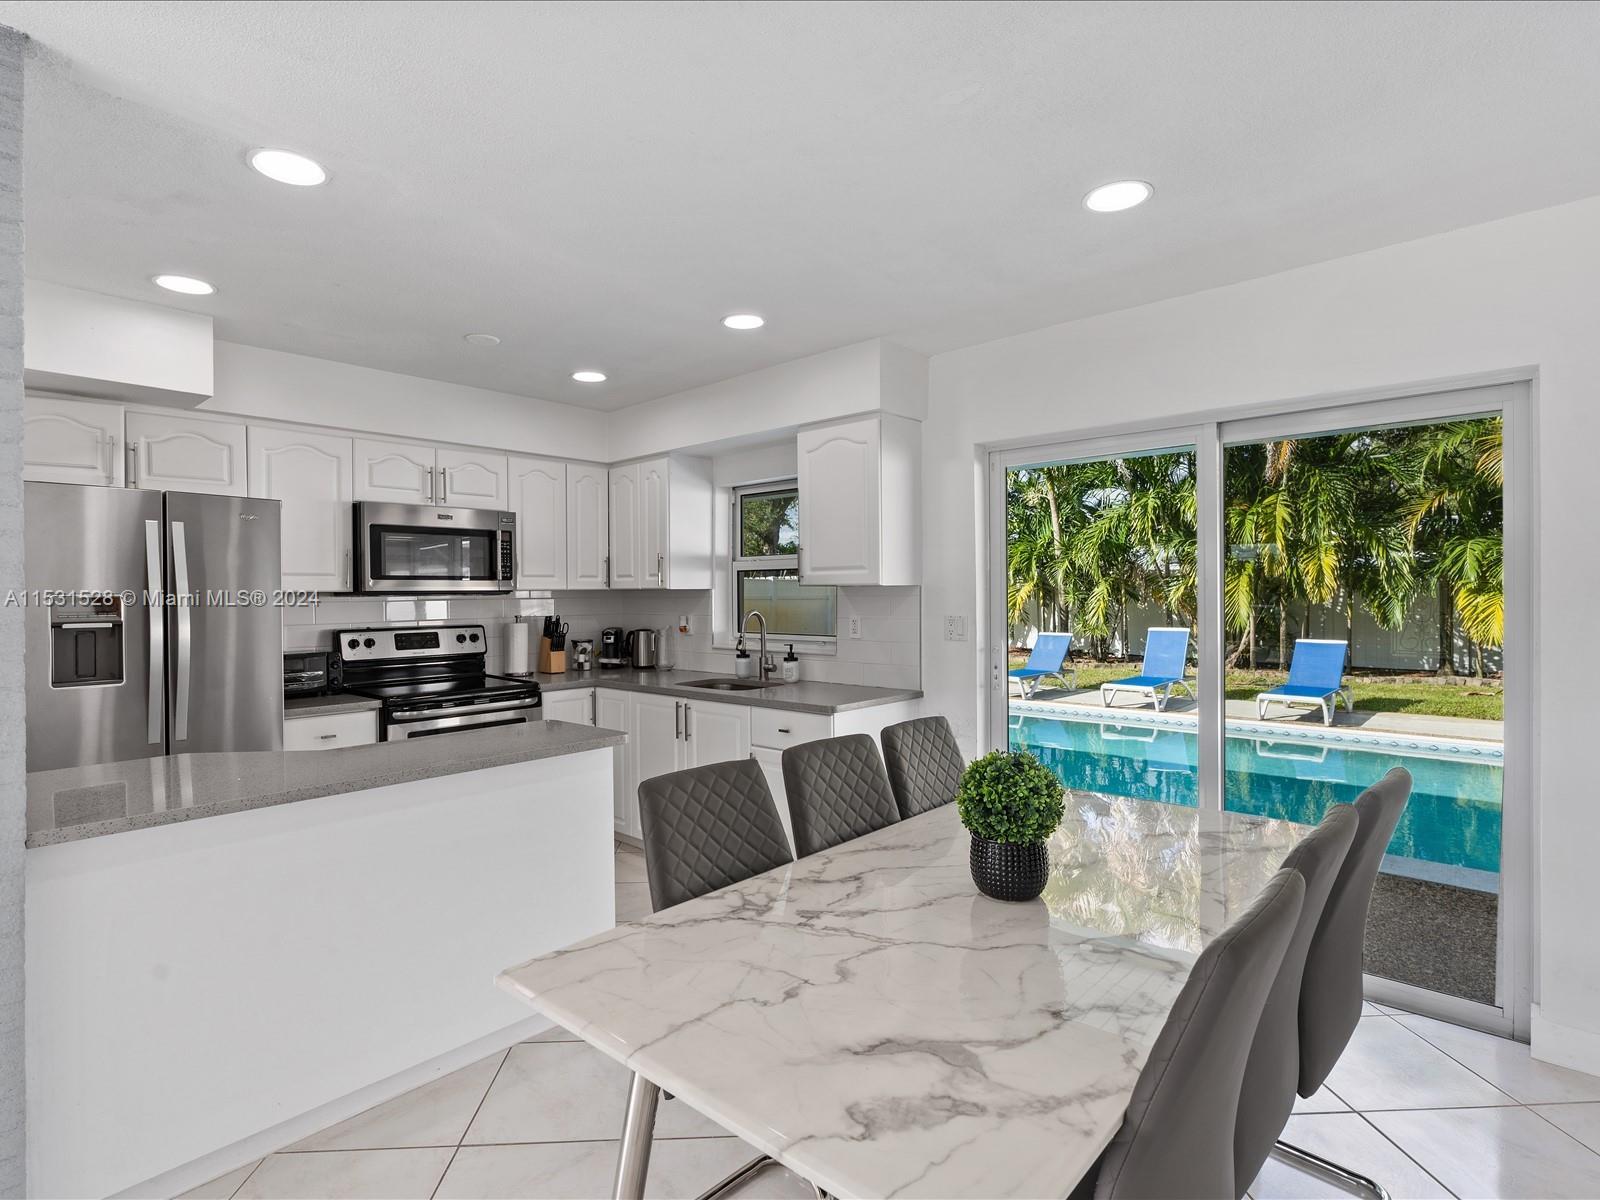 Photo of 6341 Simms St in Hollywood, FL